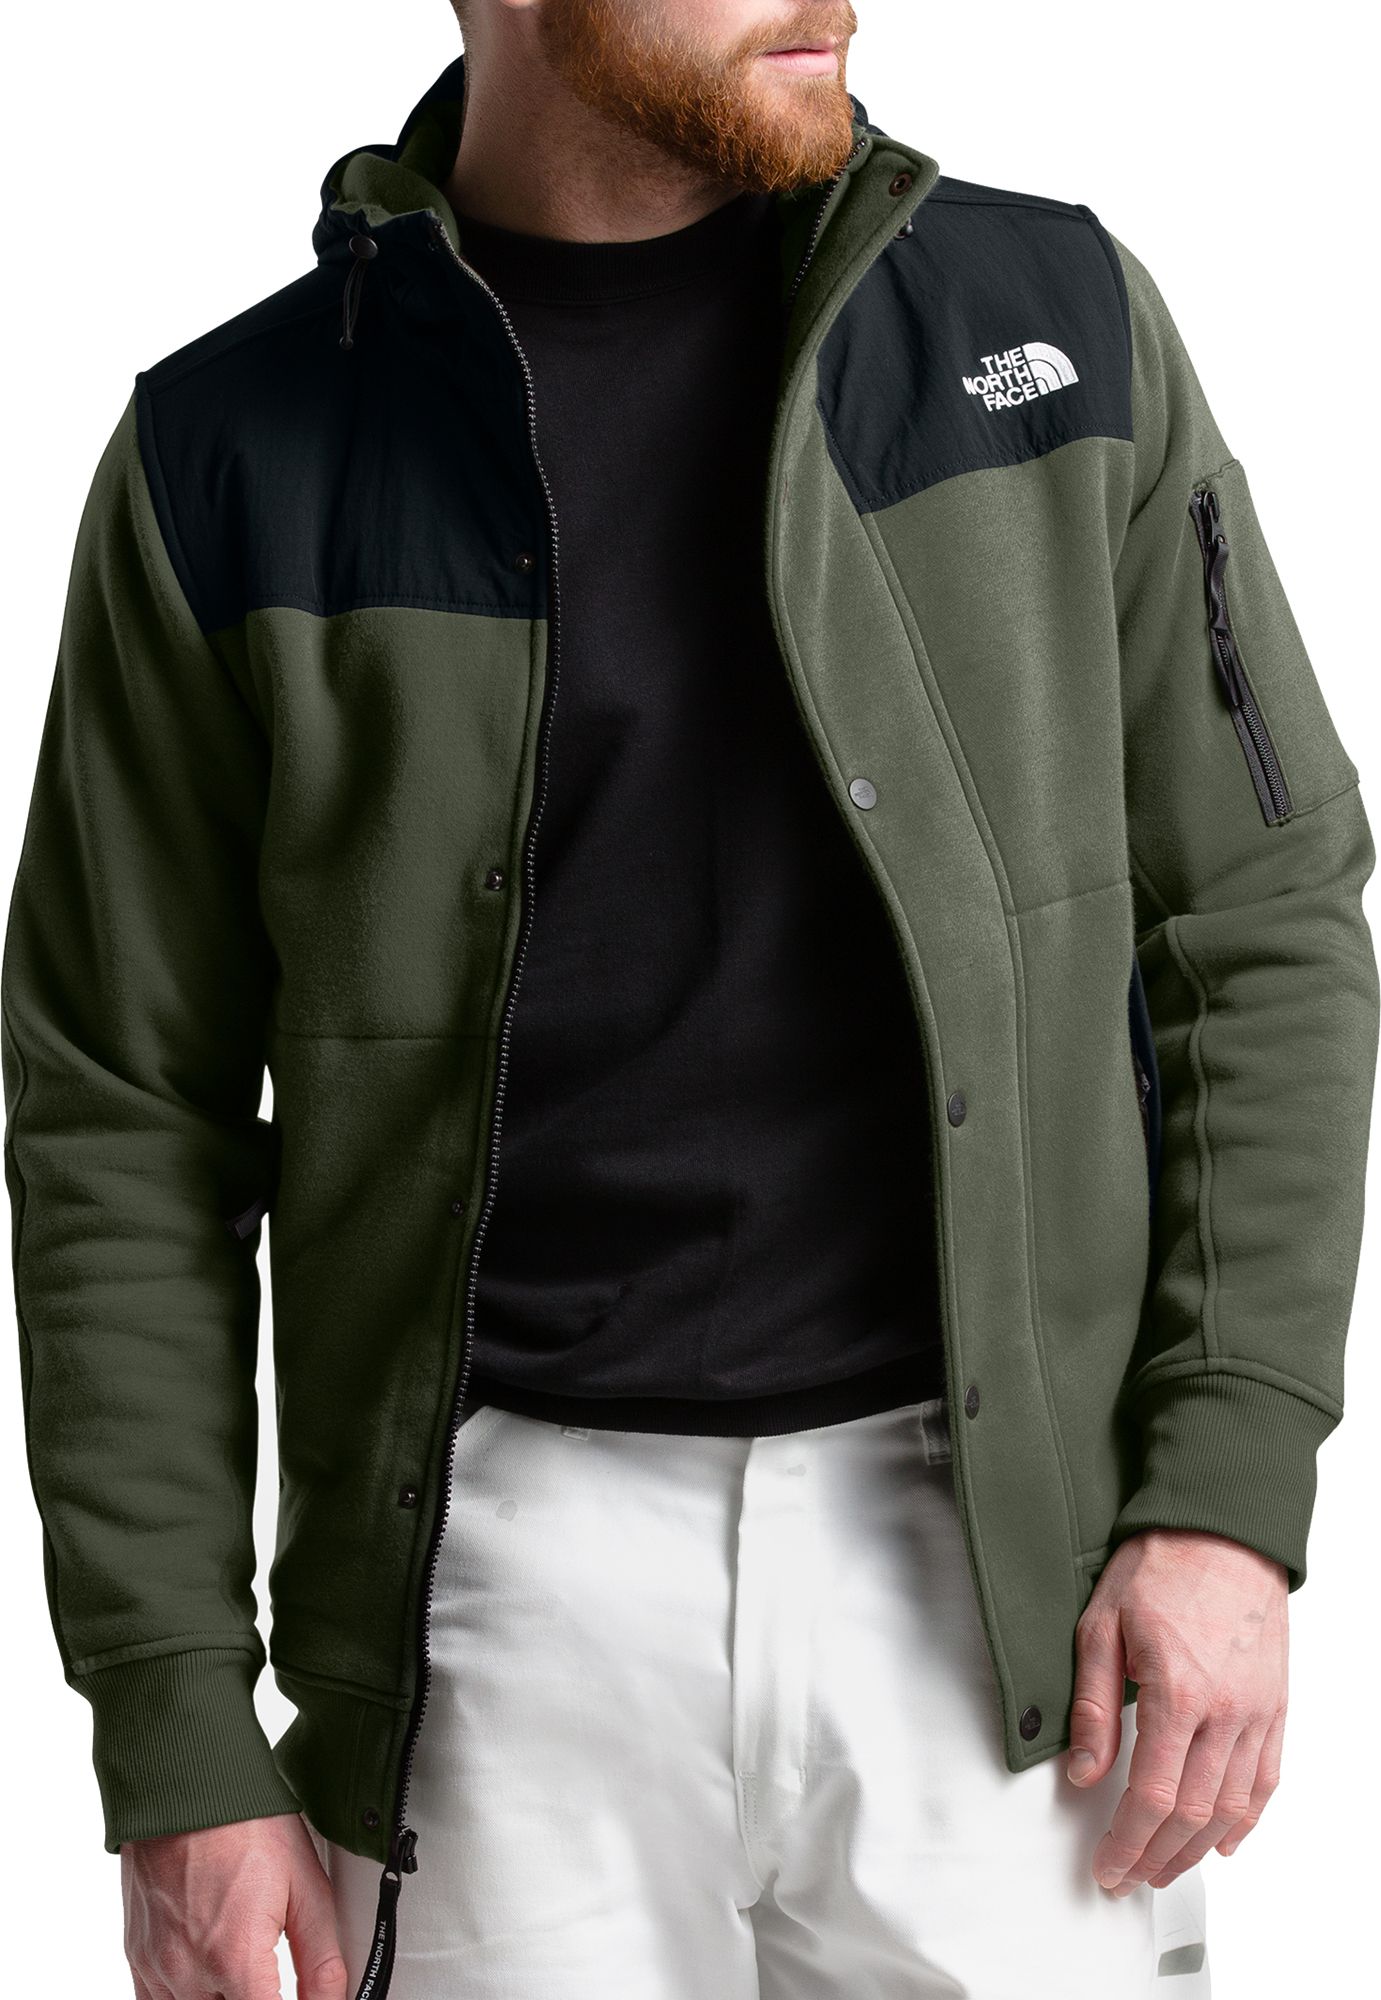 north face jackets dicks sporting goods